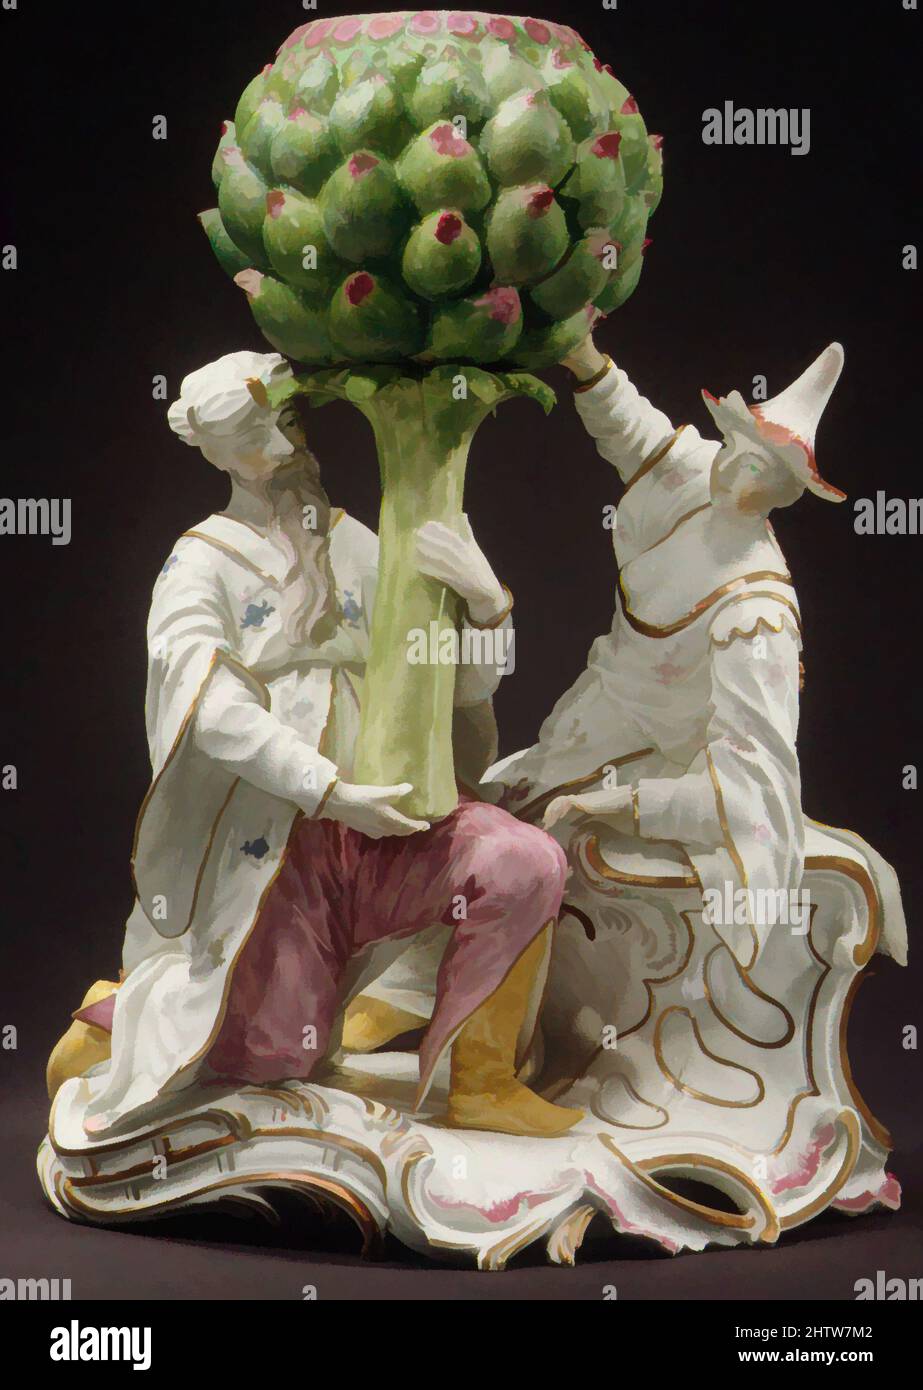 Art inspired by Asians with Artichoke as Perfume Burner, ca. 1766, German, Frankenthal, Hard-paste porcelain, Height: 11 in. (27.9 cm), Ceramics-Porcelain, Classic works modernized by Artotop with a splash of modernity. Shapes, color and value, eye-catching visual impact on art. Emotions through freedom of artworks in a contemporary way. A timeless message pursuing a wildly creative new direction. Artists turning to the digital medium and creating the Artotop NFT Stock Photo